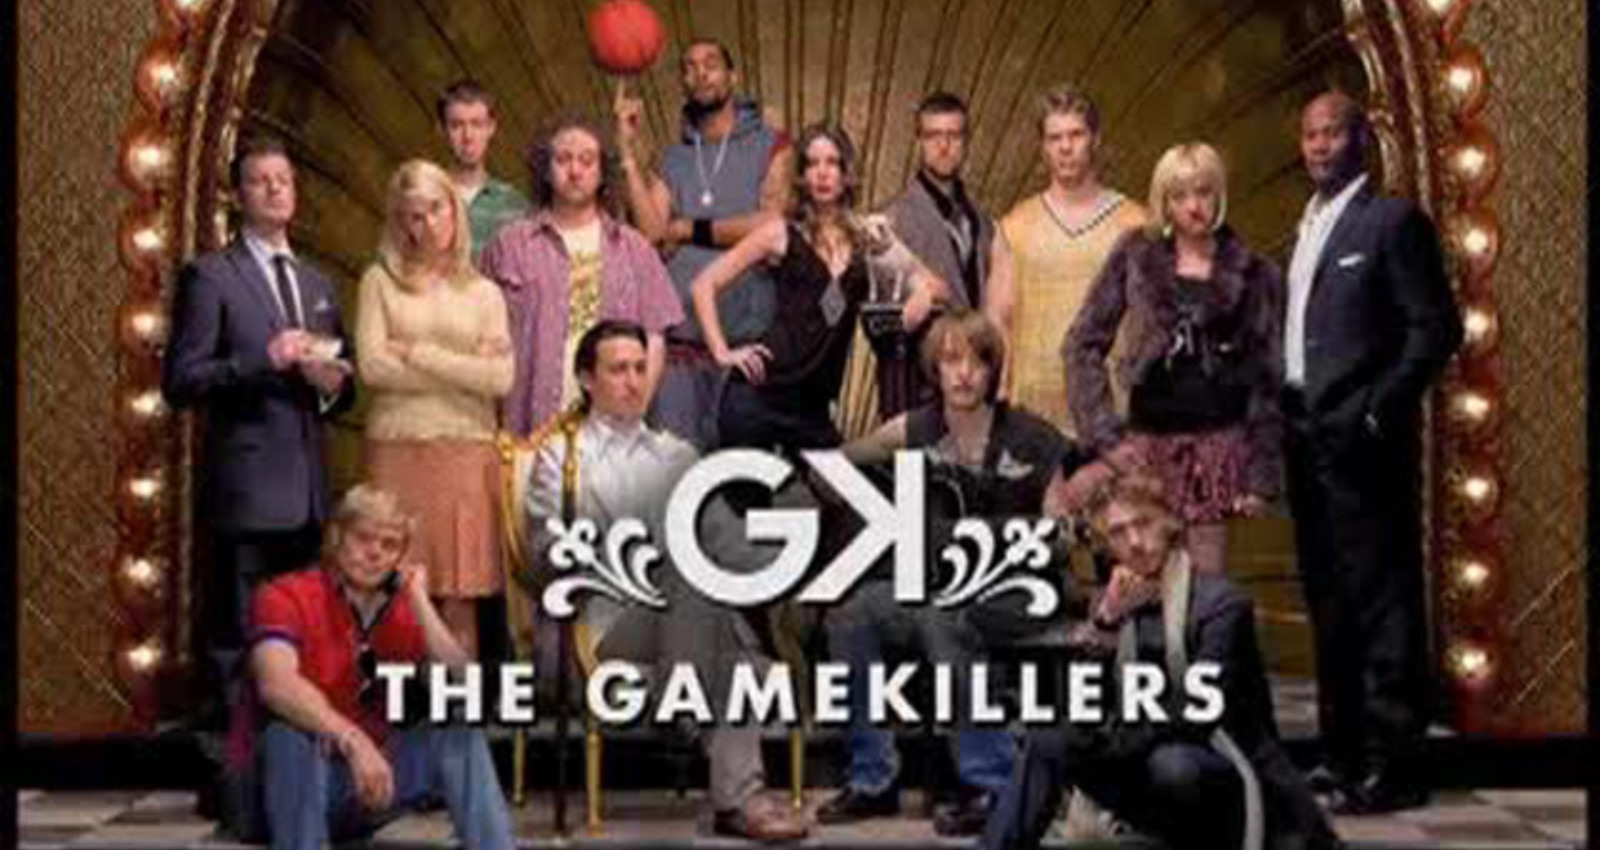 The Gamekillers Campaign